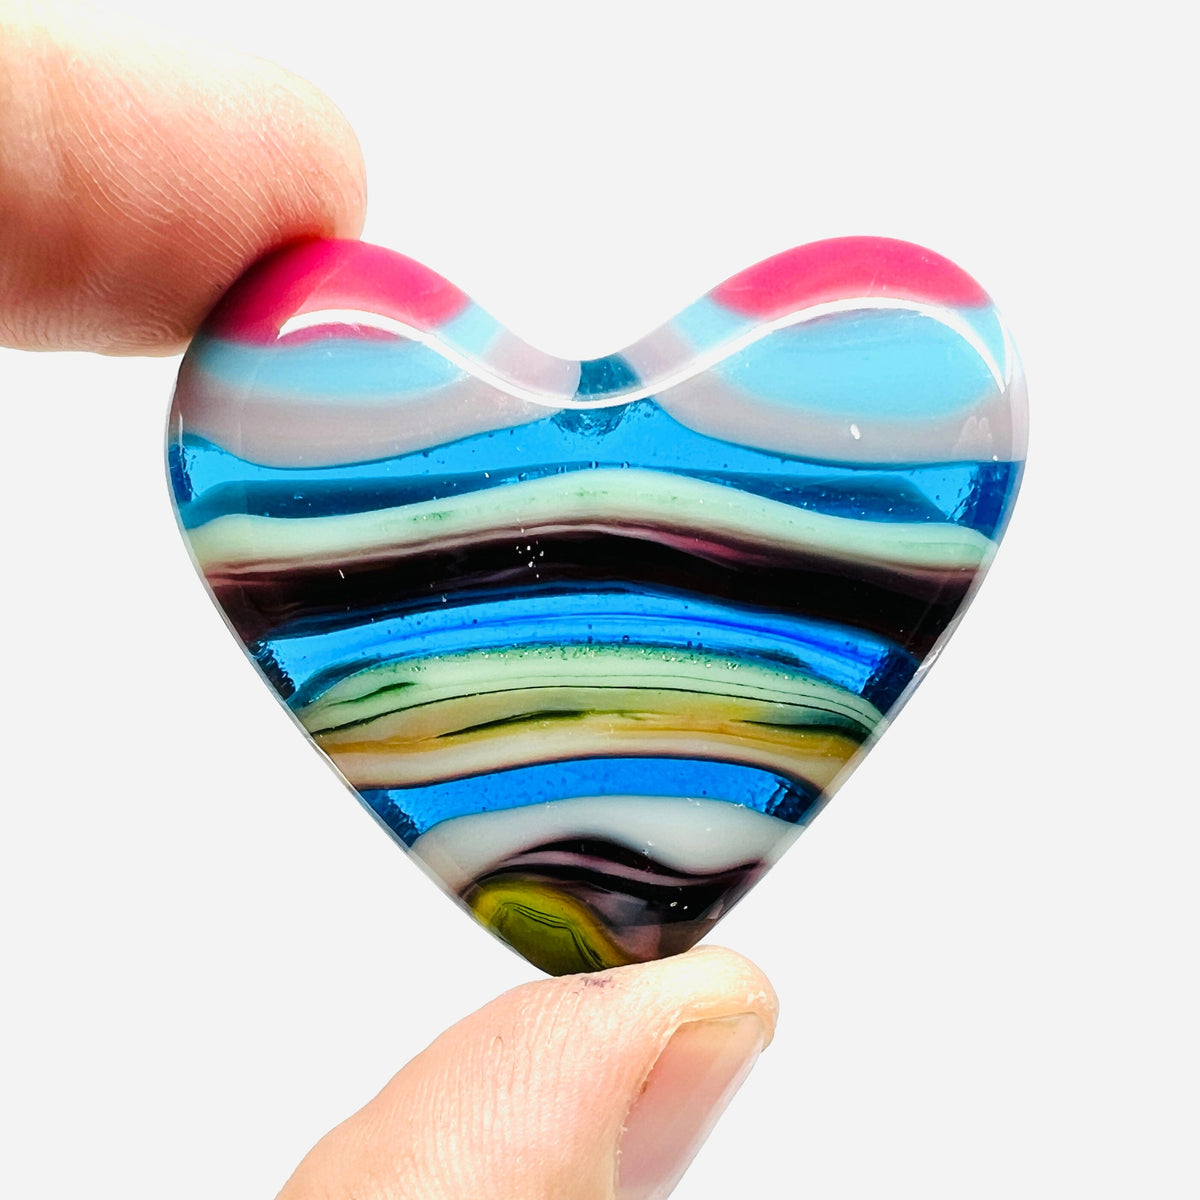 Fused Pocket Heart 324 Miniature Glimmer Glass Gifts 